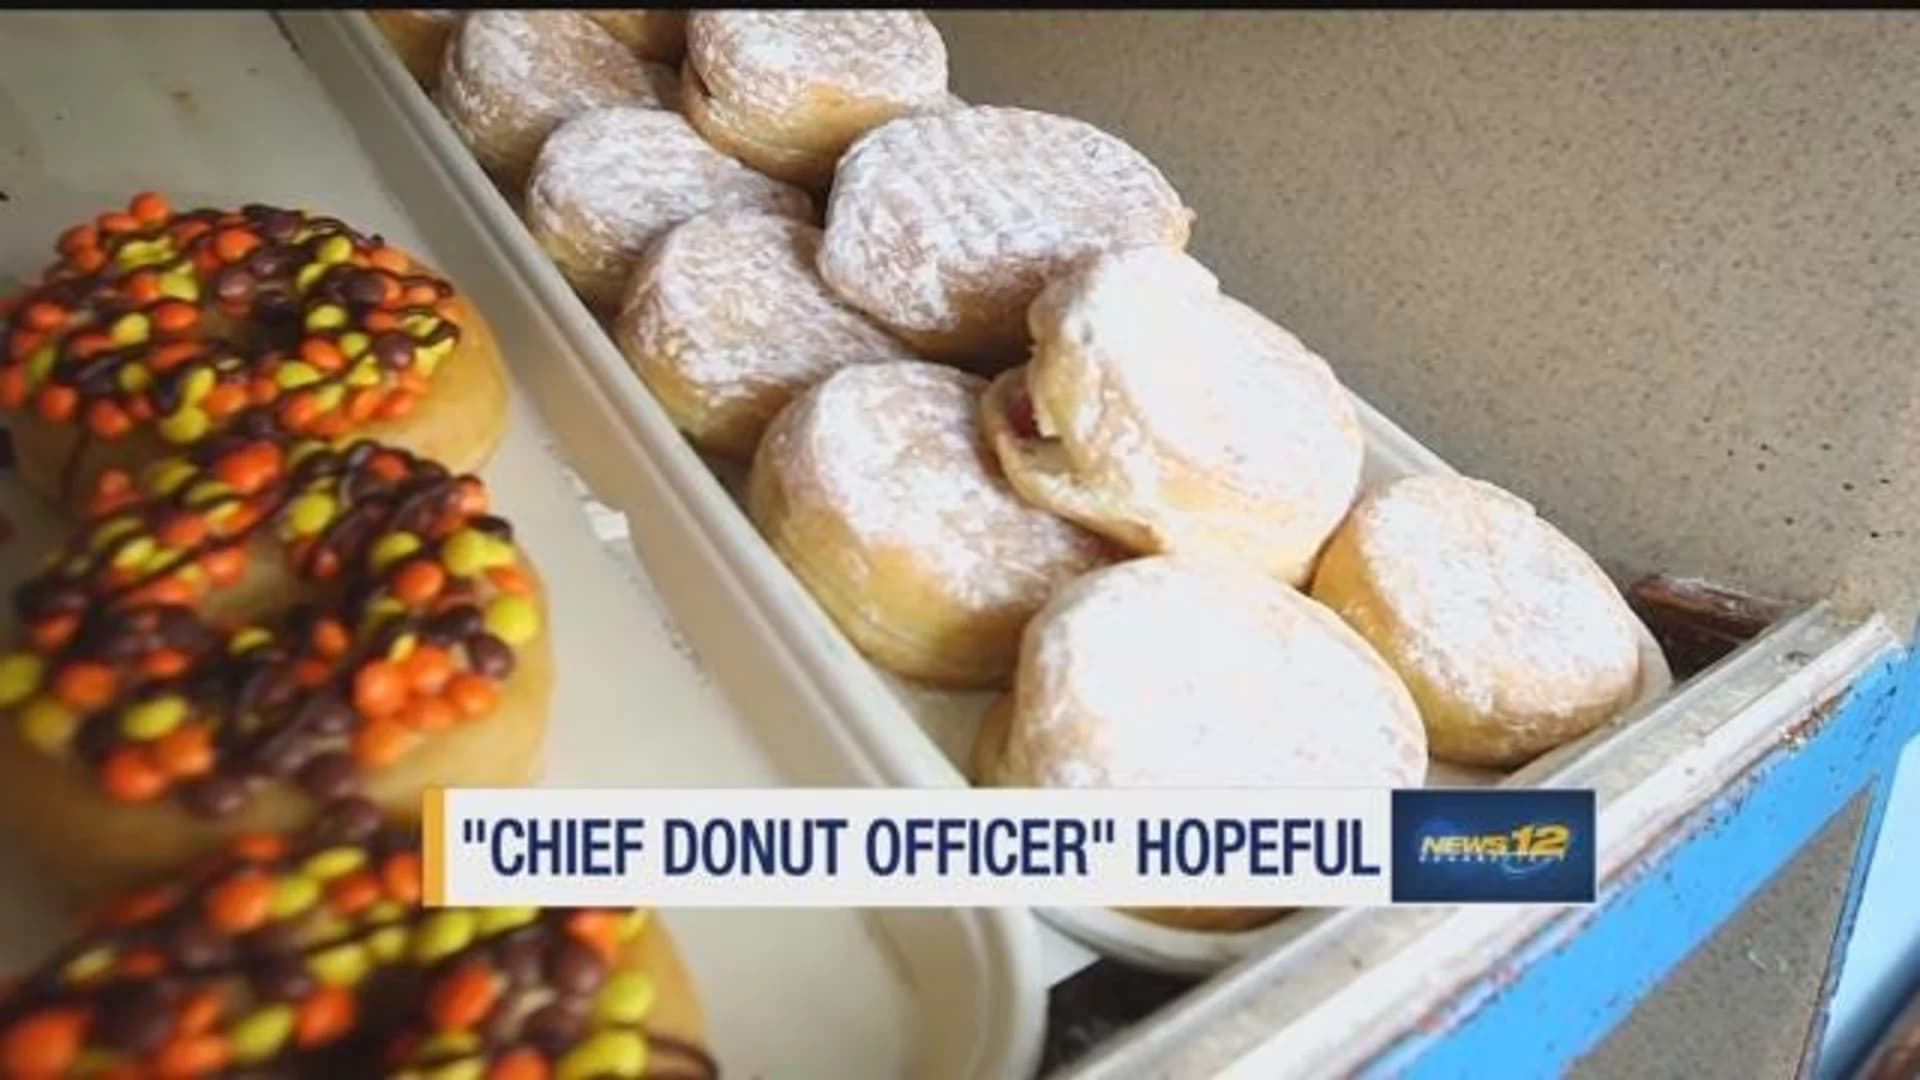 Resident vying for Entenmann’s “Chief Donut Officer” title